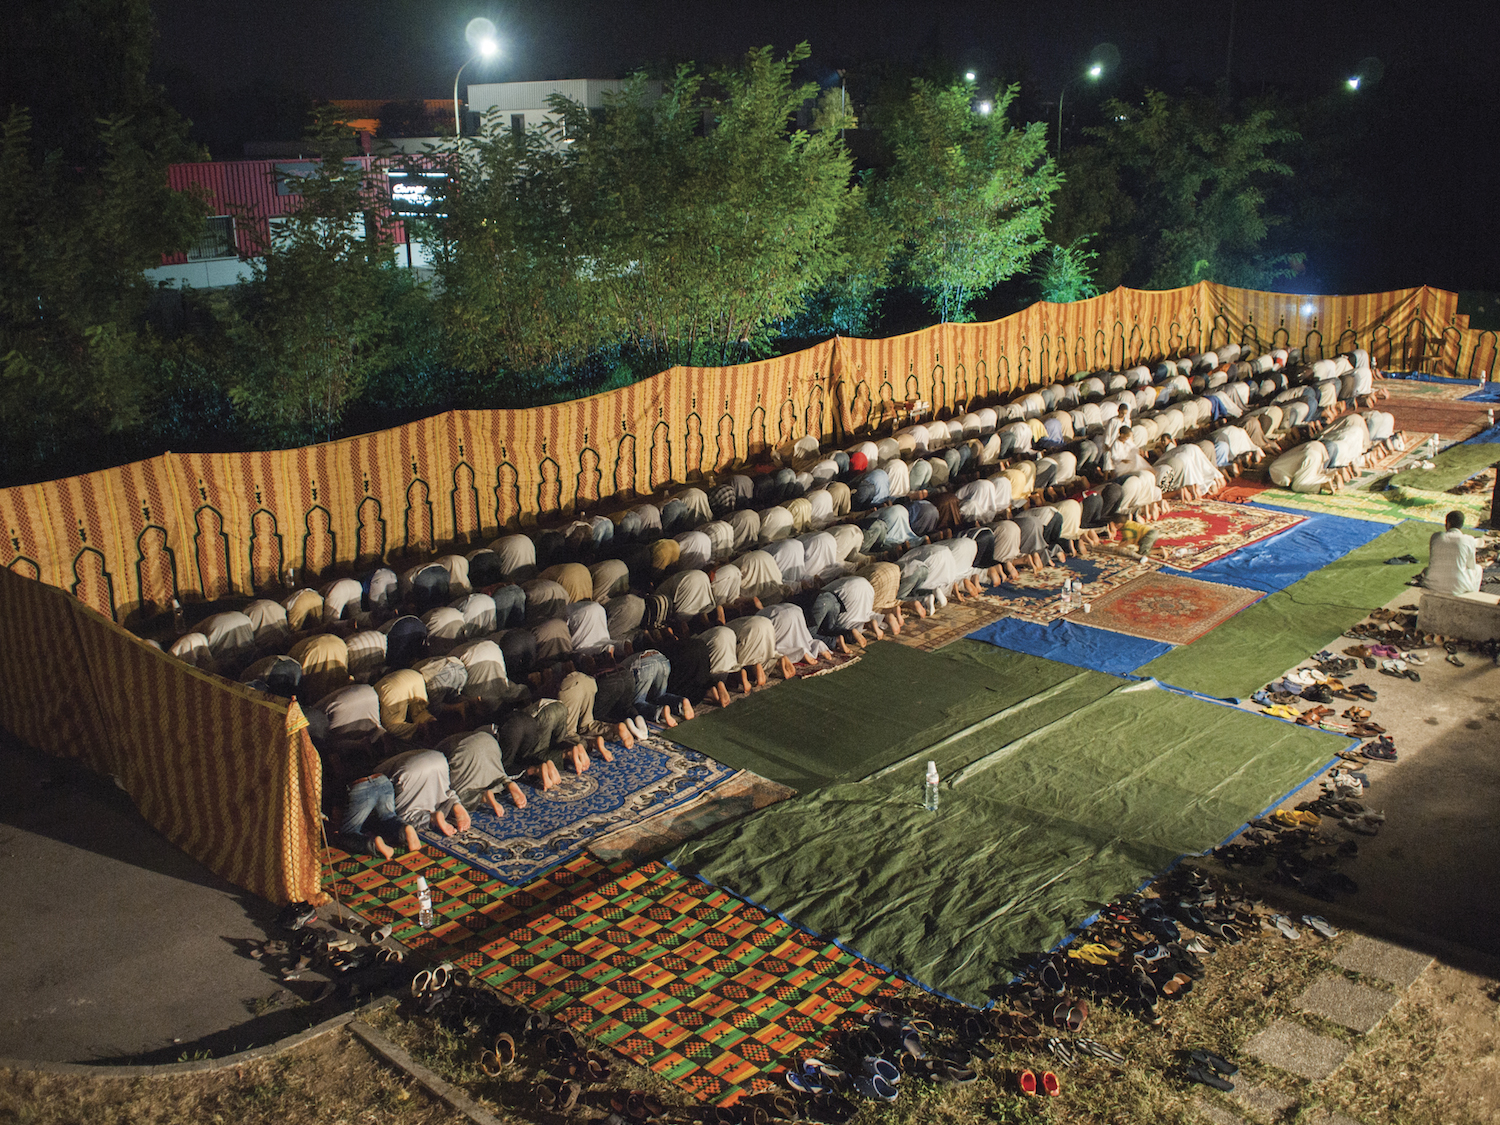 Hidden Islam, Islamic makeshift places of worship in north east Italy, 2009-2013
A parking lot used as Islamic makeshift place of worship, Province of Treviso